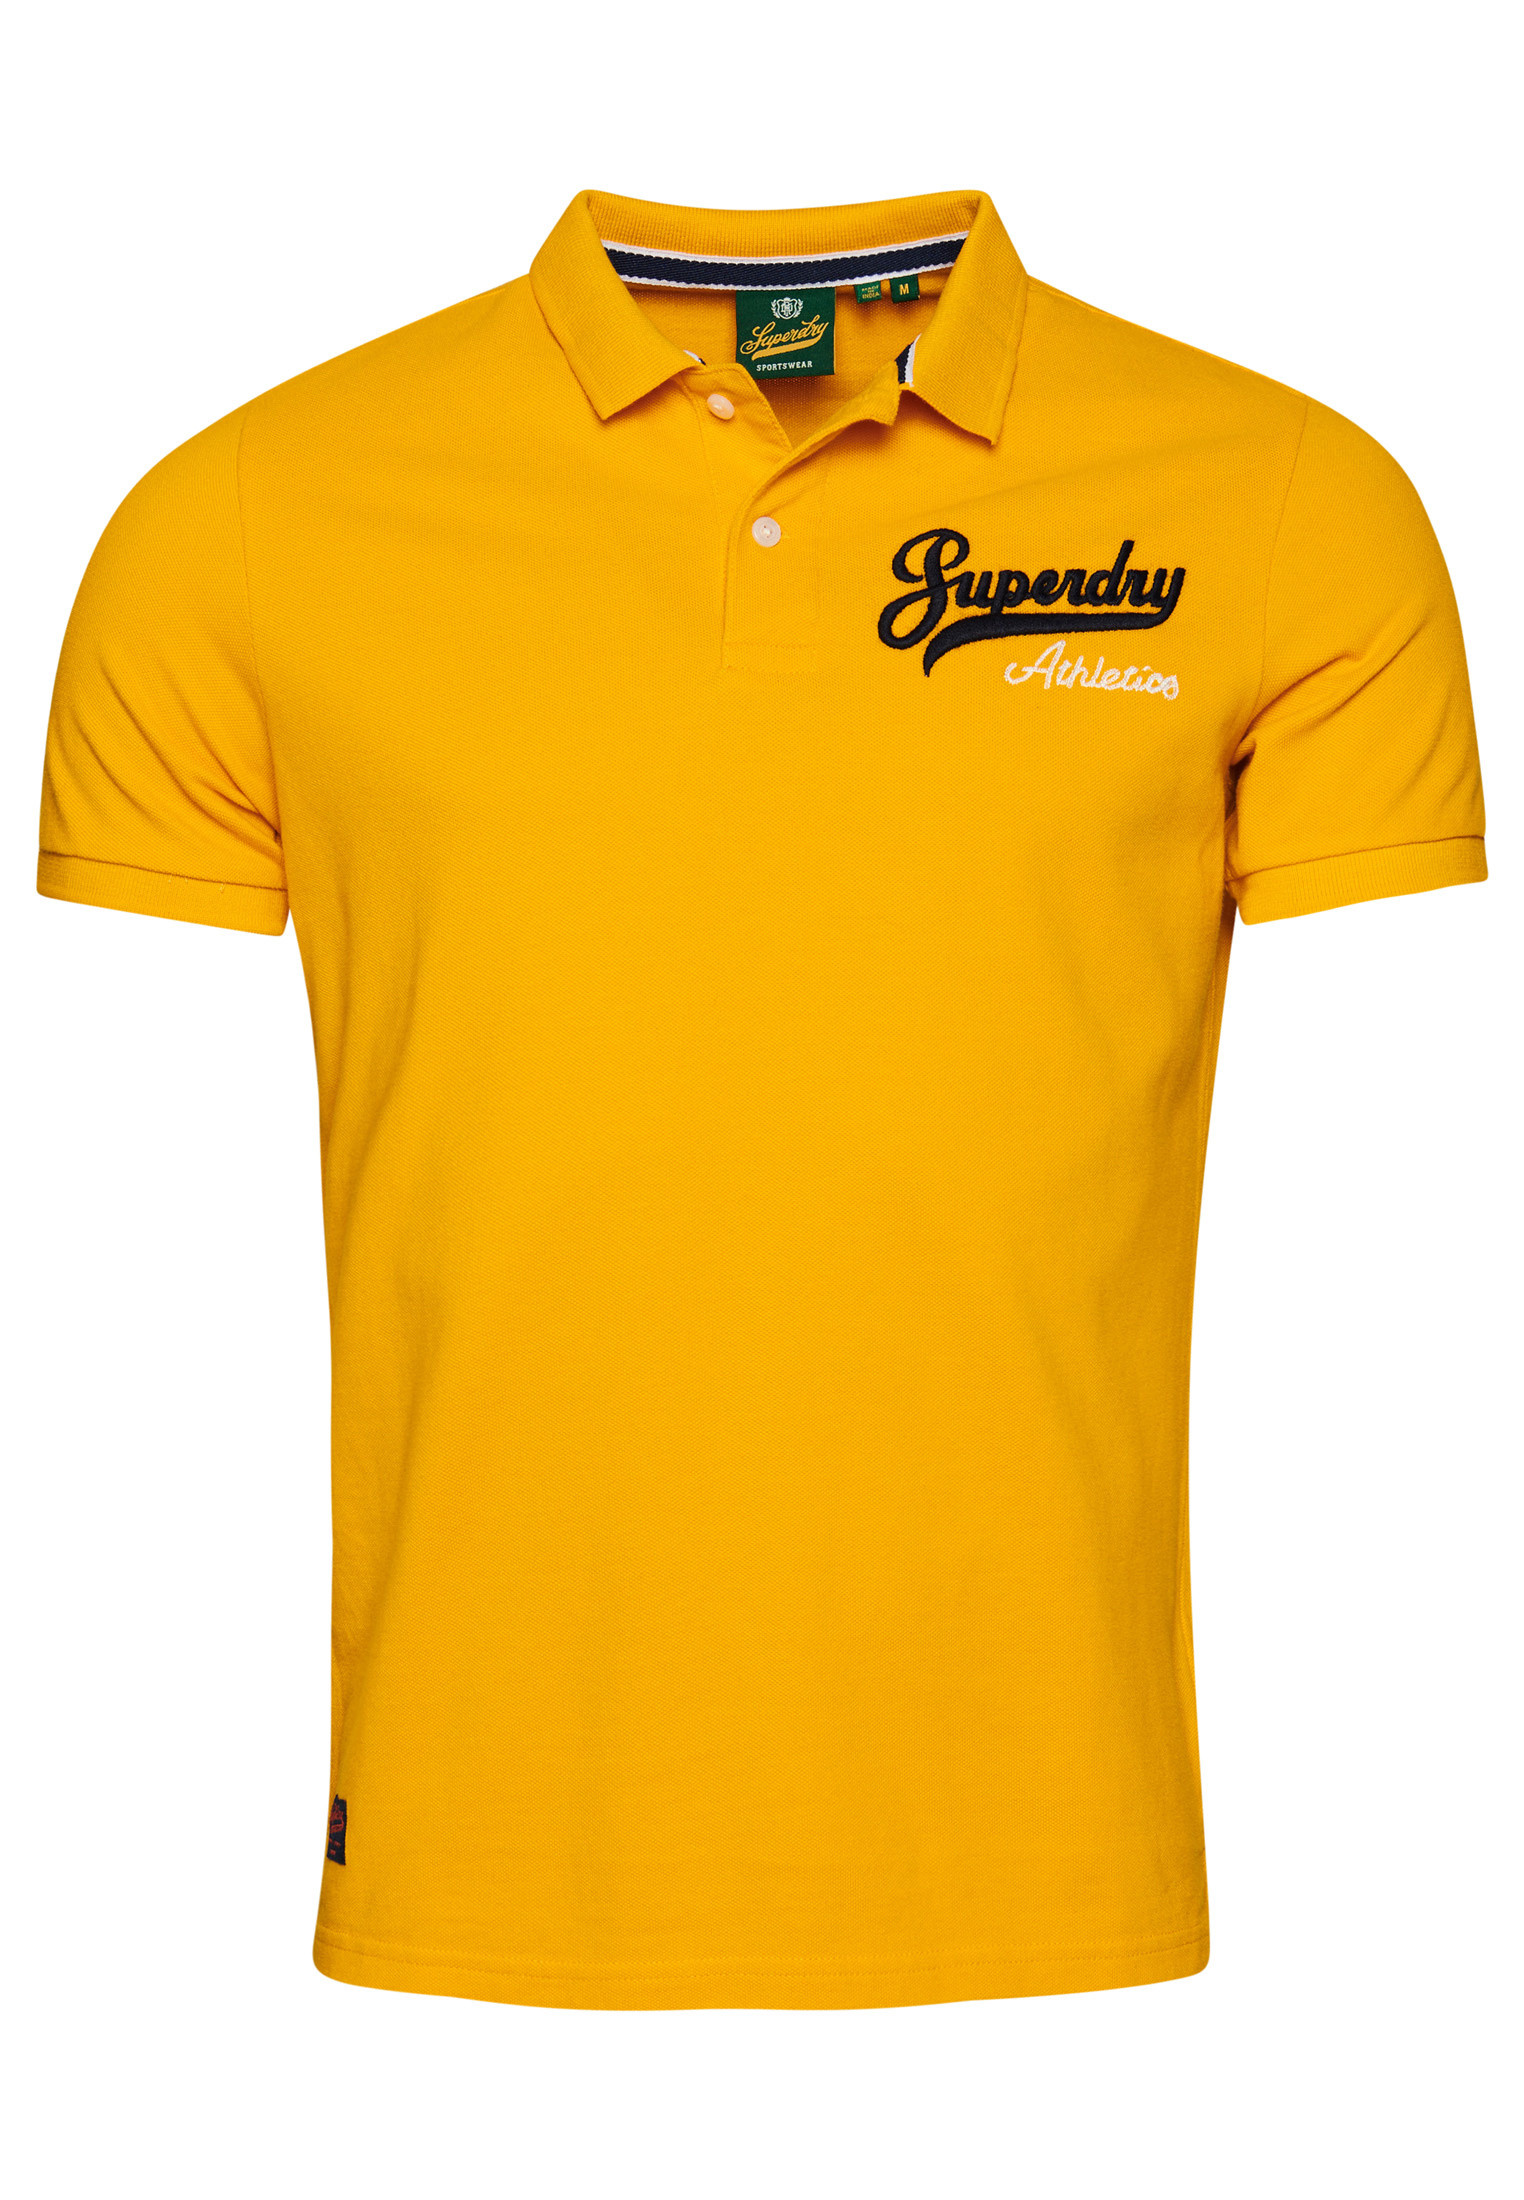 Superdry - Cotton piqué polo shirt with logo, Sunflower Yellow, large image number 0